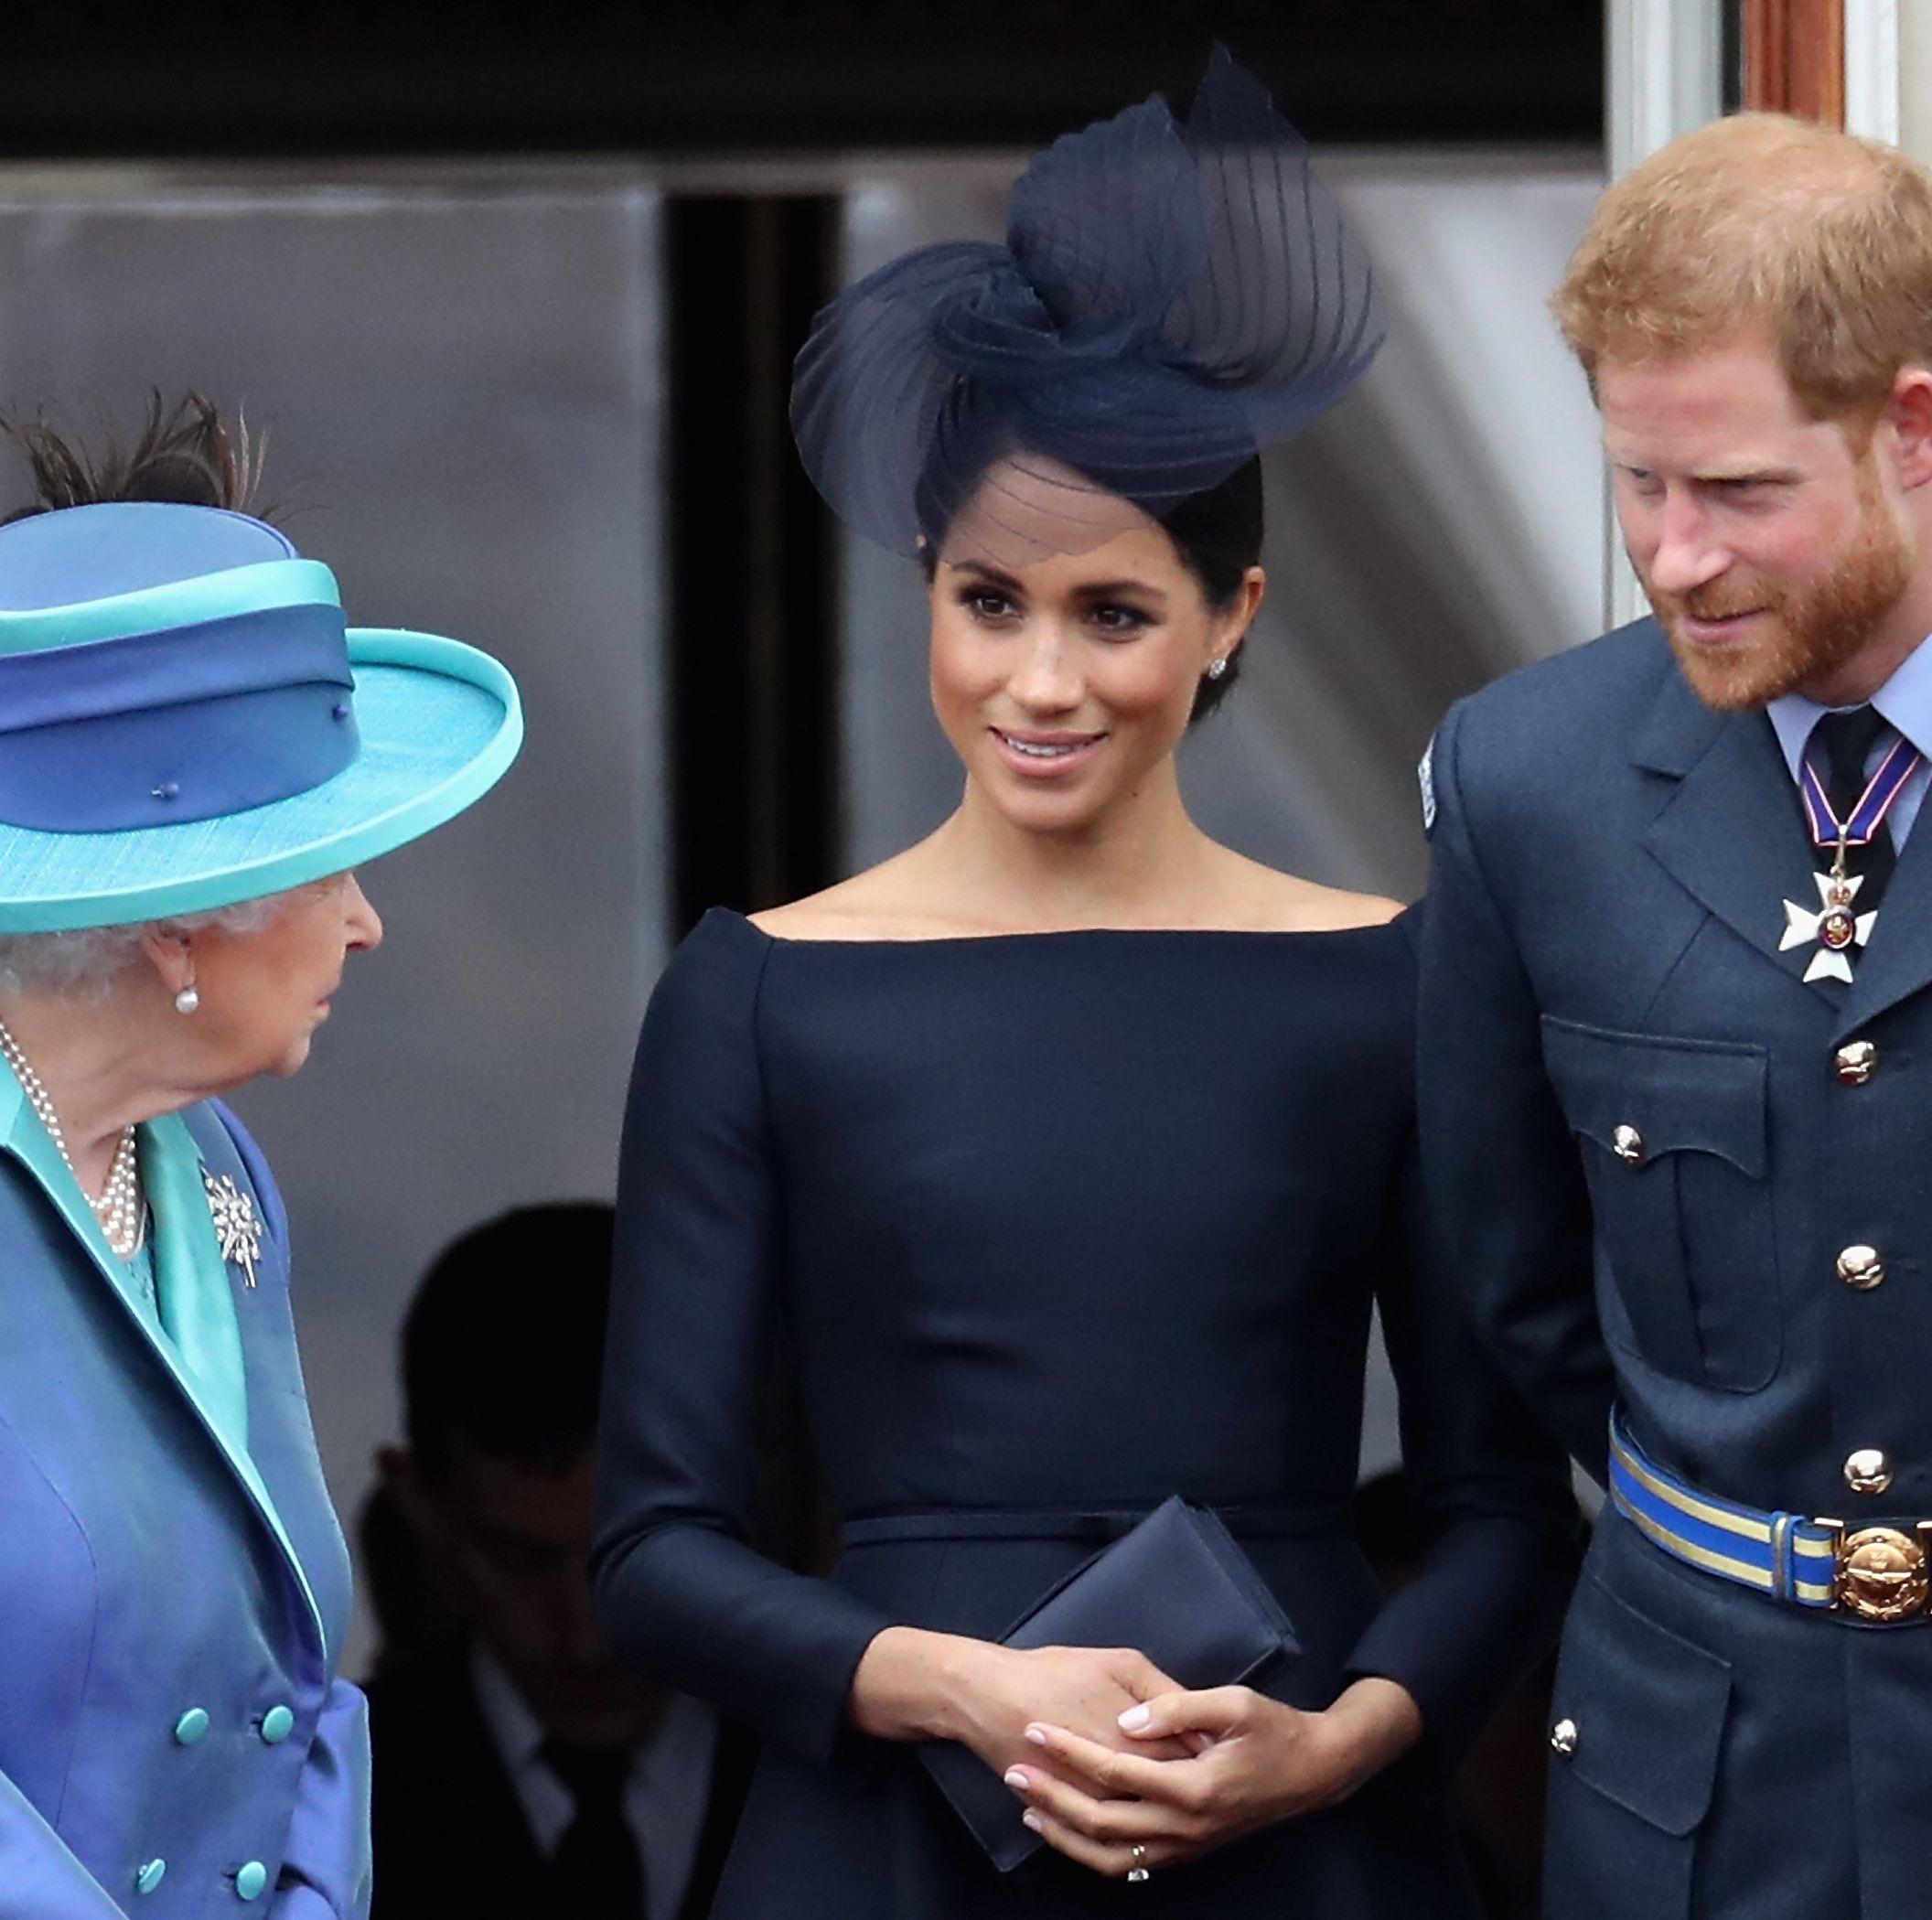 Prince Harry, Meghan Markle, and Prince Andrew Will Be Excluded From the Queen's Jubilee Balcony Appearance